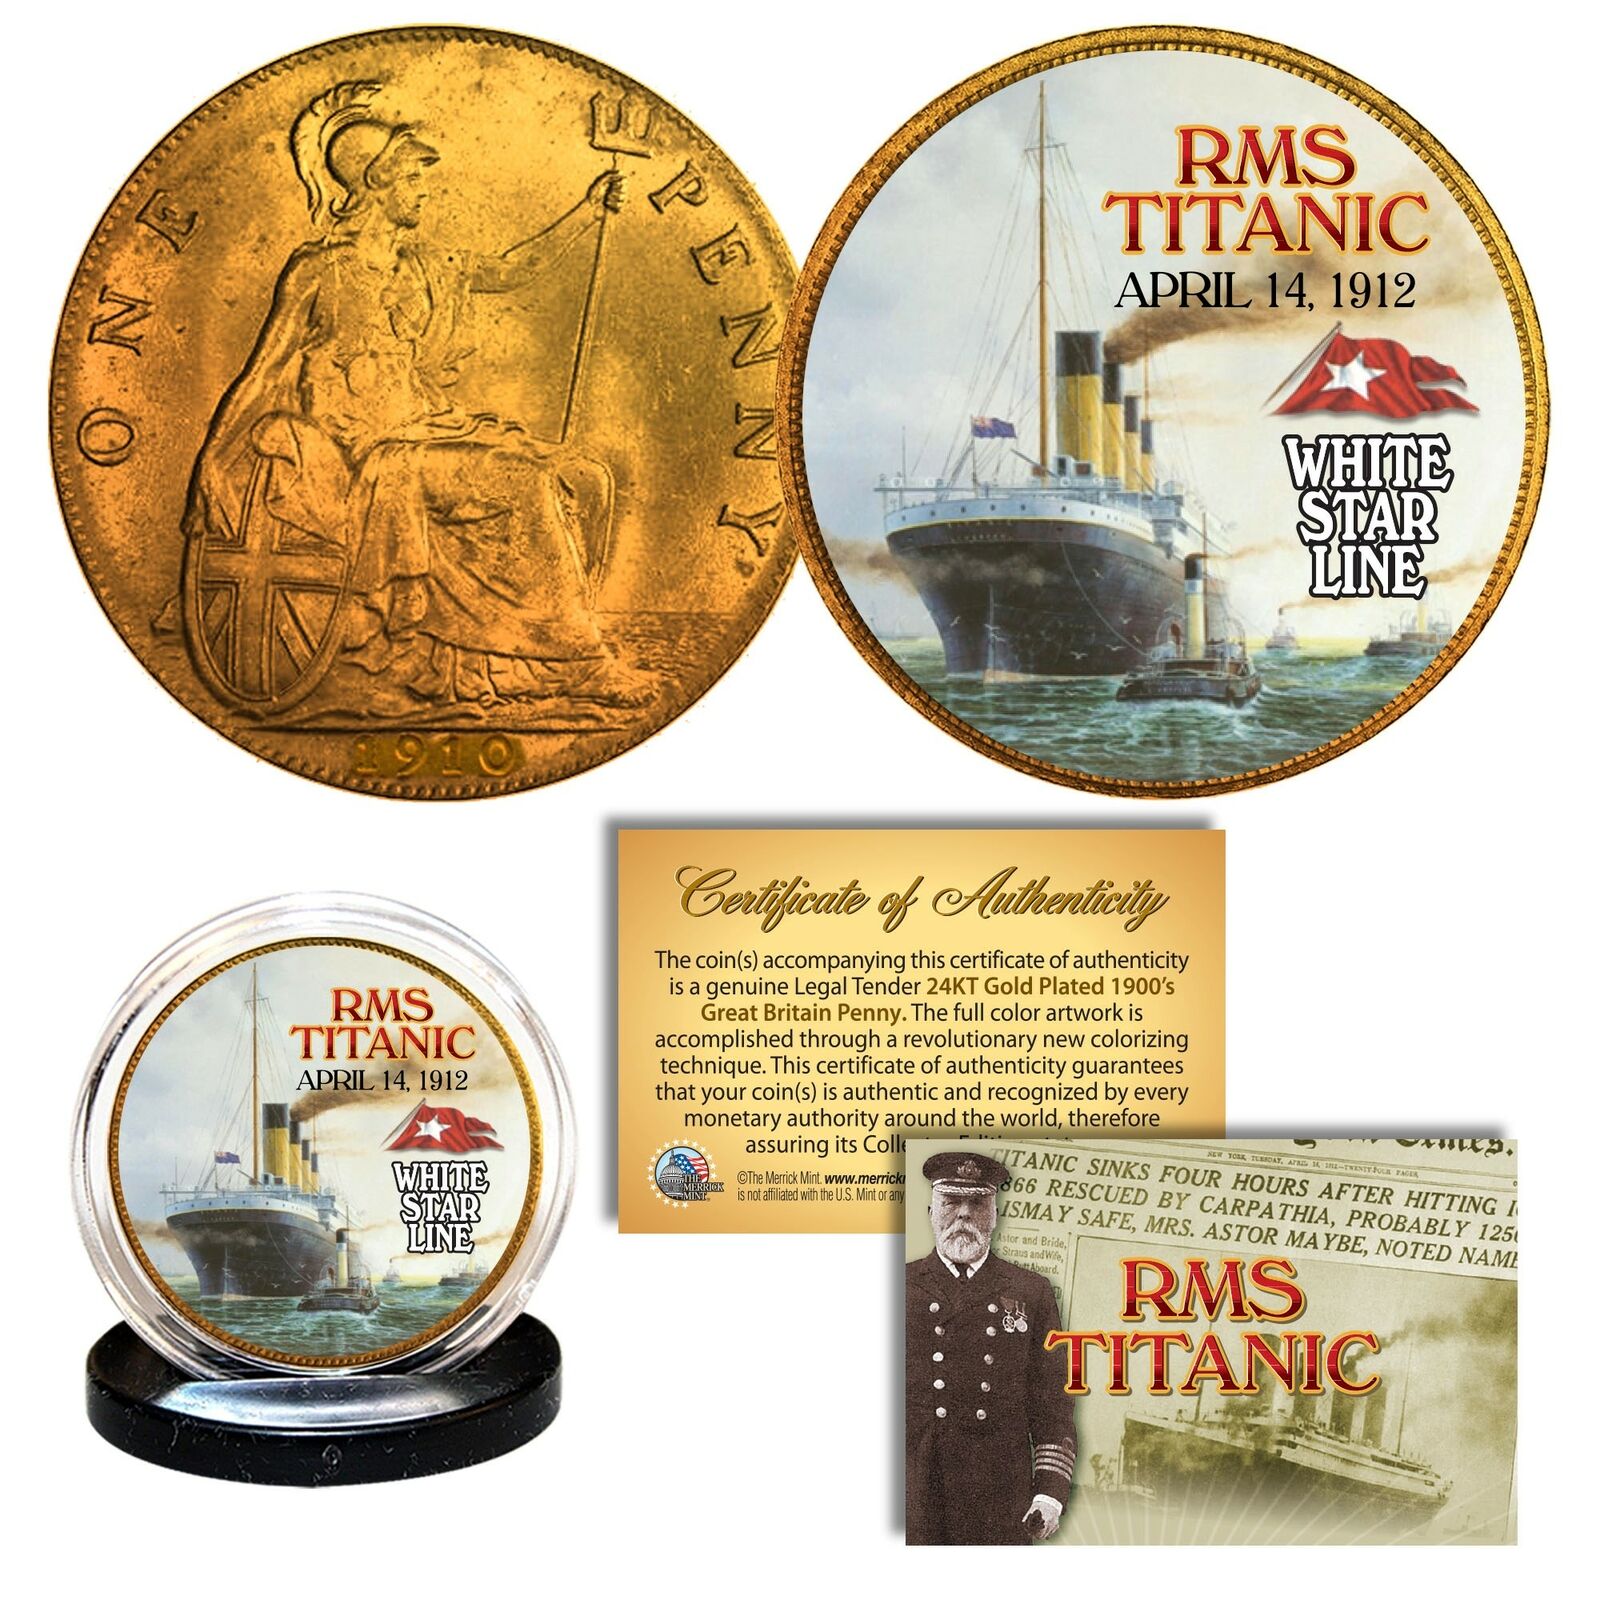 RMS TITANIC  April 14, 1912  Colorized 1900’s Gold Clad Great Britain Penny Coin